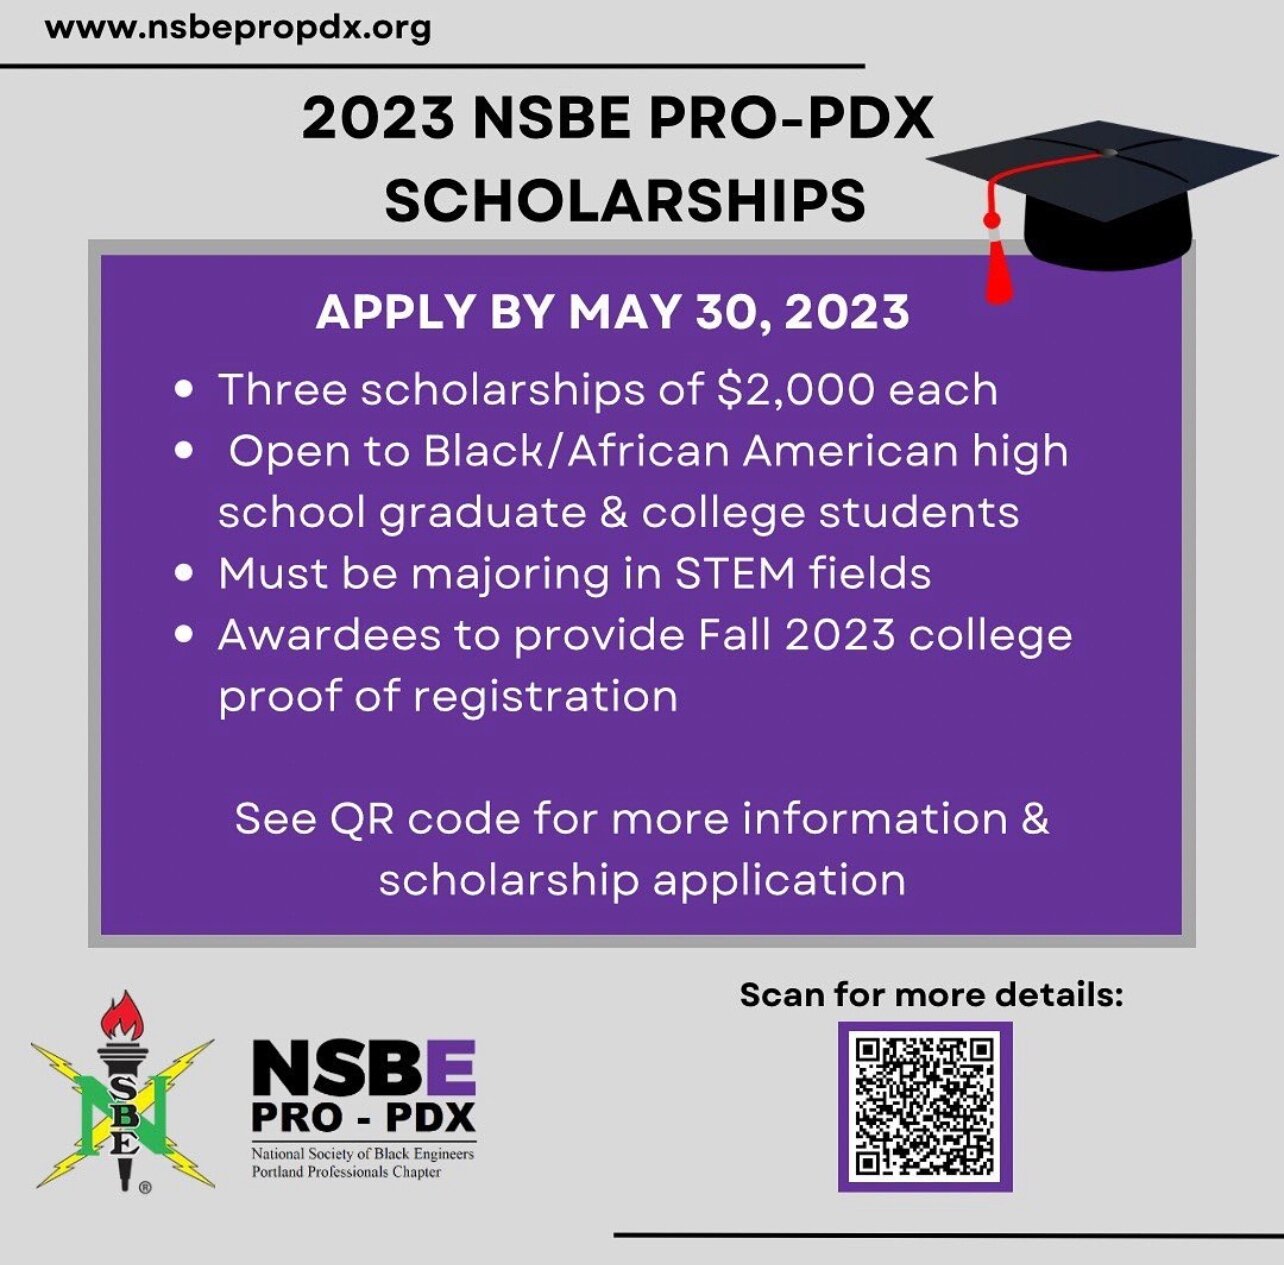 Monday! 5/1
Link In Bio!
@nsbepropdx

&ldquo;The 2023 NSBE Portland Professionals scholarship application is live! This year we will be awarding (3) $2,000 scholarships to Black students studying STEM
fields. Must be a high school graduate, enrolled 